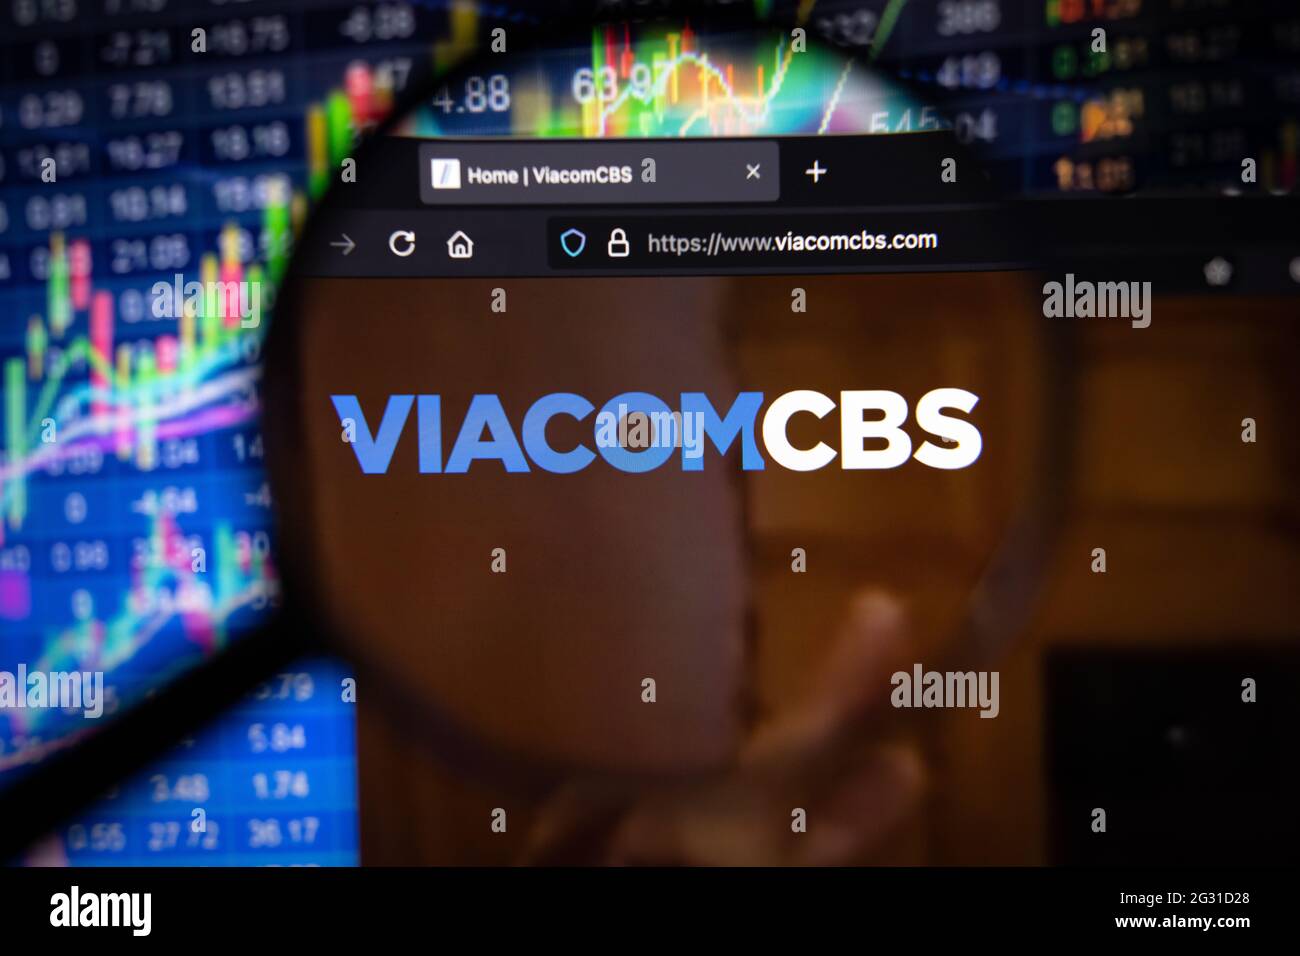 Viacom CBS company logo on a website with blurry stock market developments in the background, seen on a computer screen through a magnifying glass Stock Photo